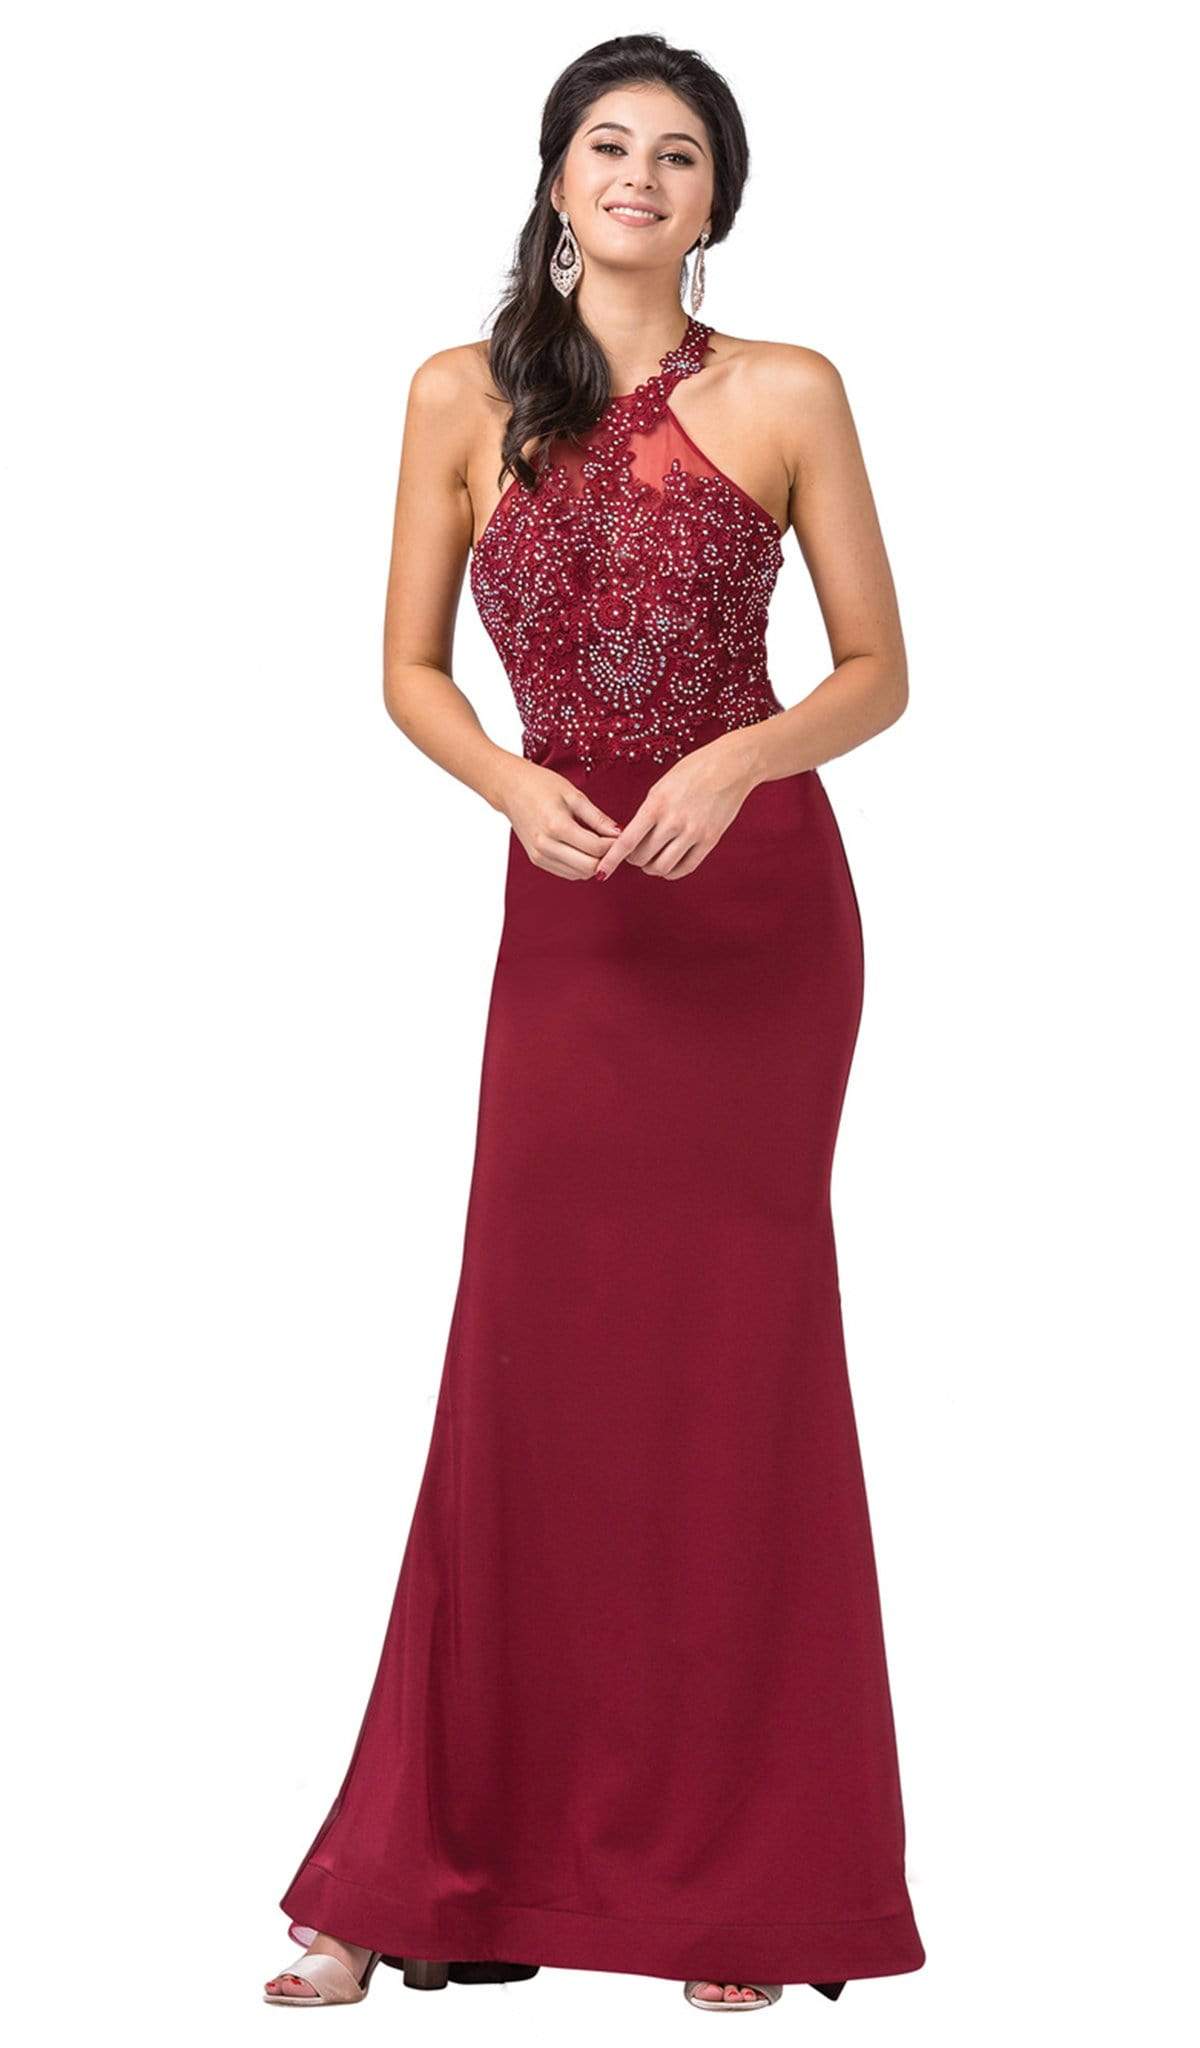 Dancing Queen - 2499 Appliqued Illusion Back Paneled Long Gown
